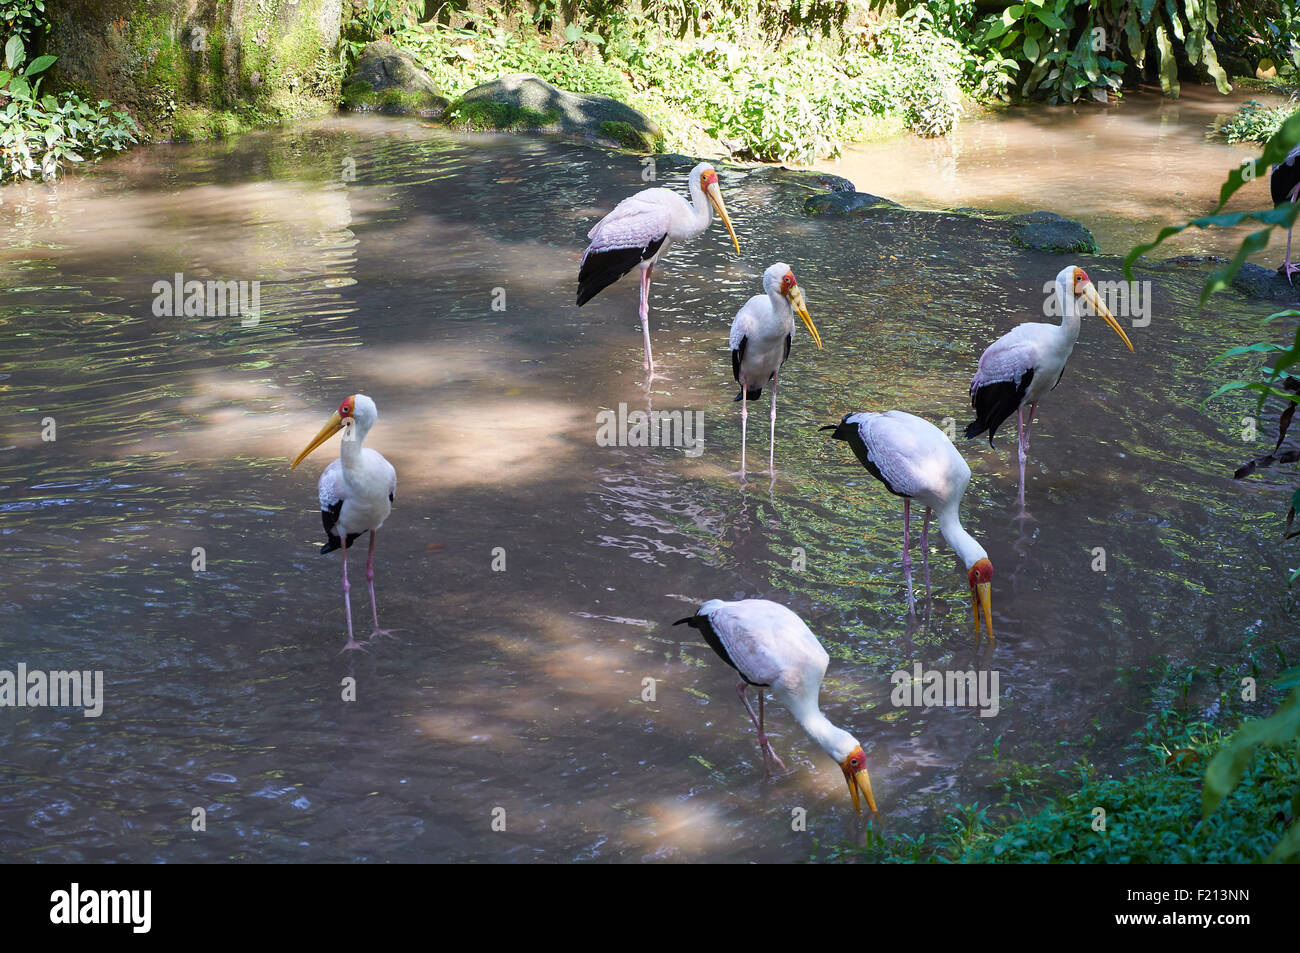 Several Yellow-billed storks standing in shallow water Stock Photo